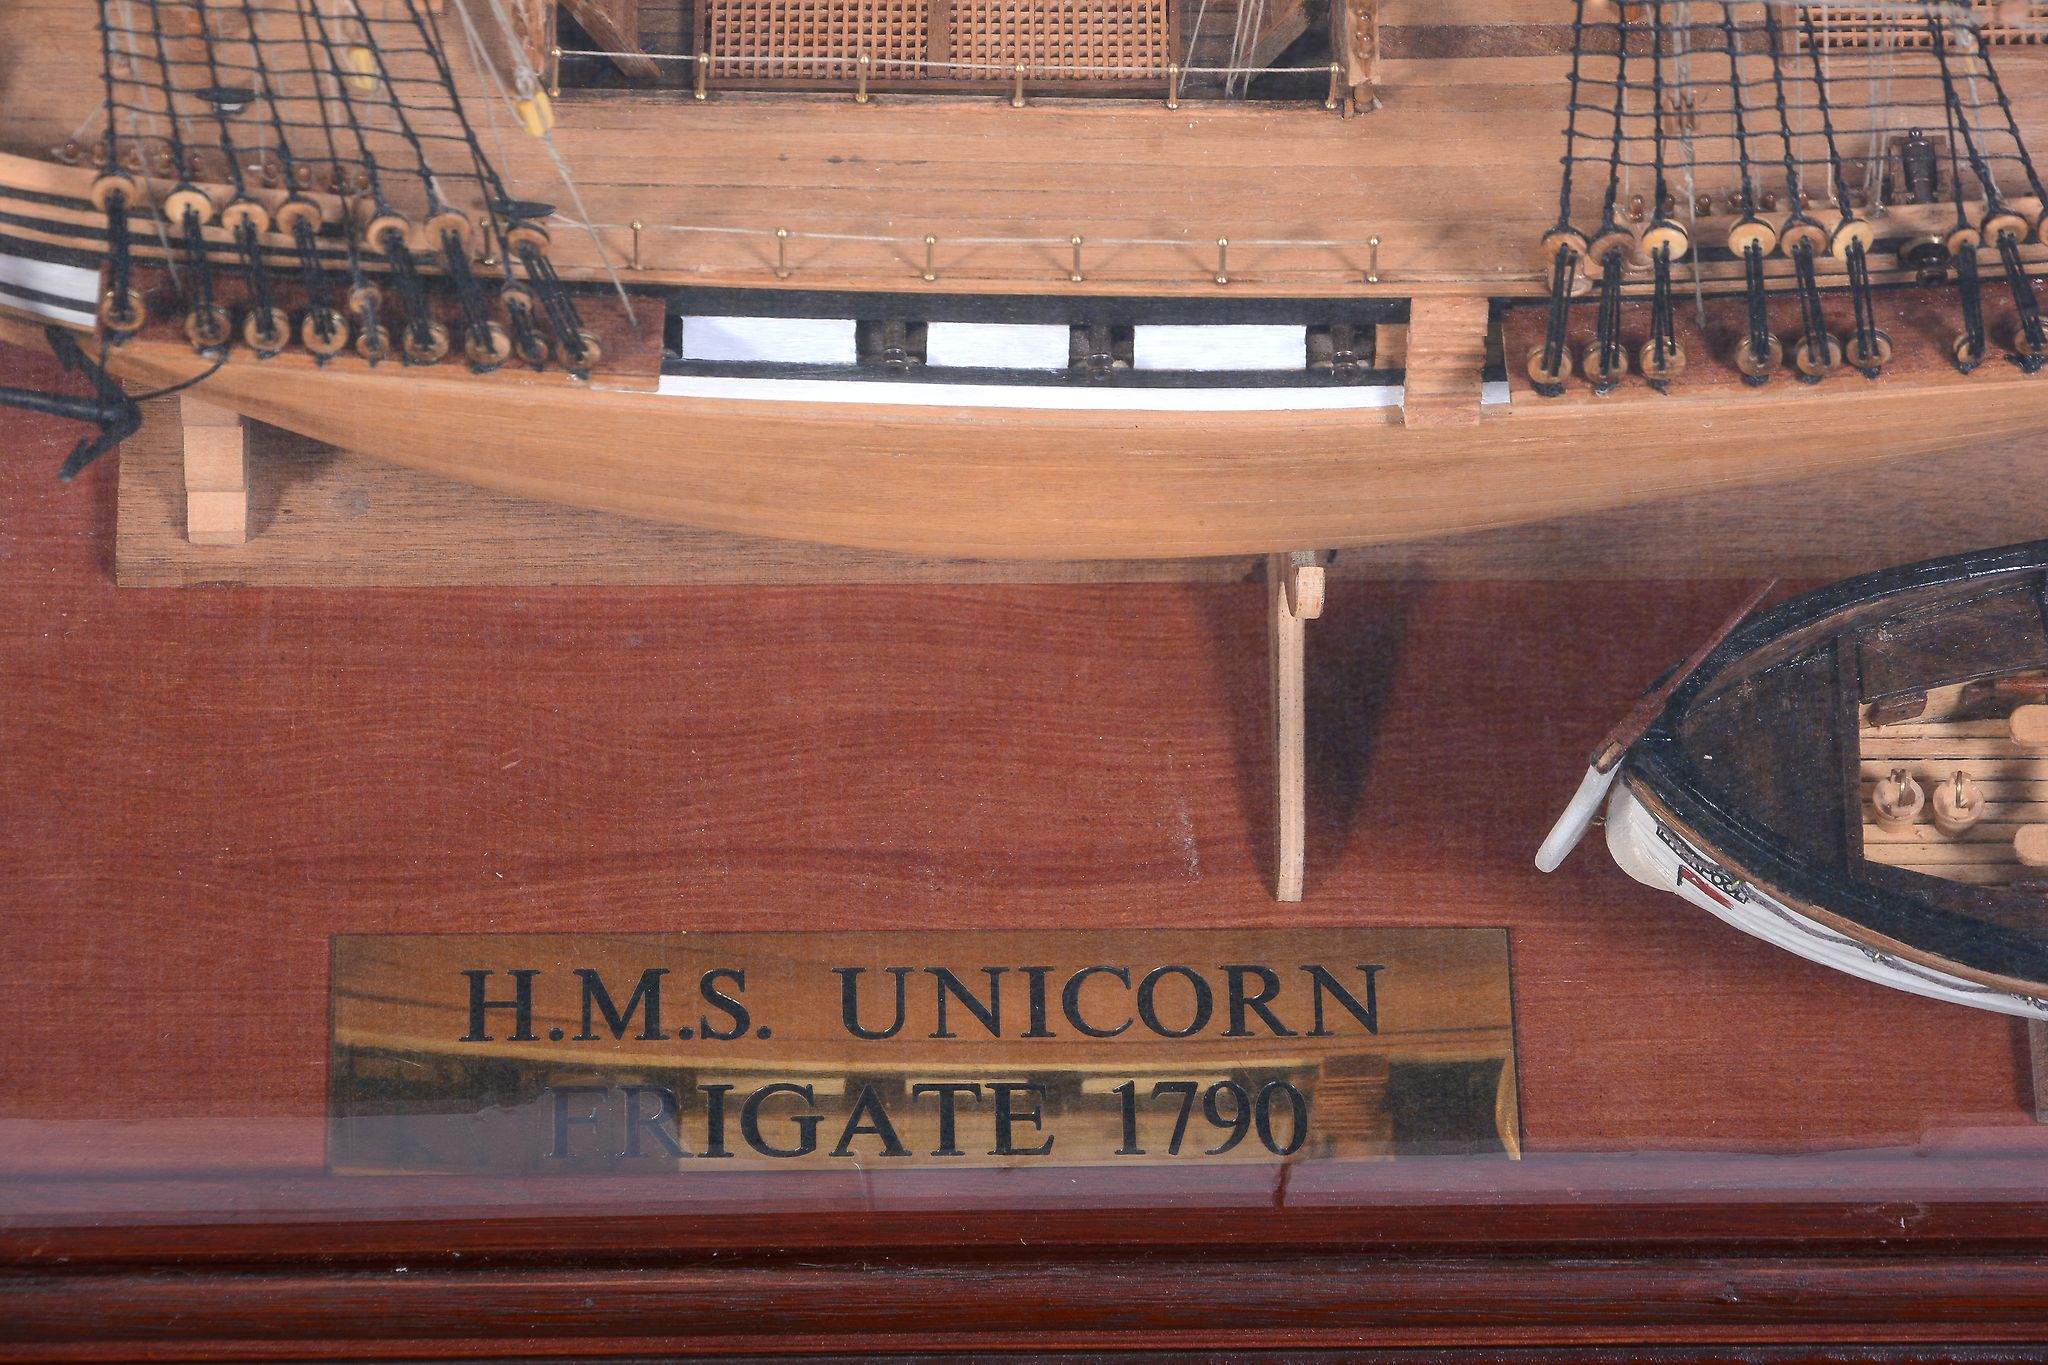 A scale model of HMS Unicorn Frigate 1790, built by the late Mr Ivor Dolling of Chesham and being - Image 2 of 2